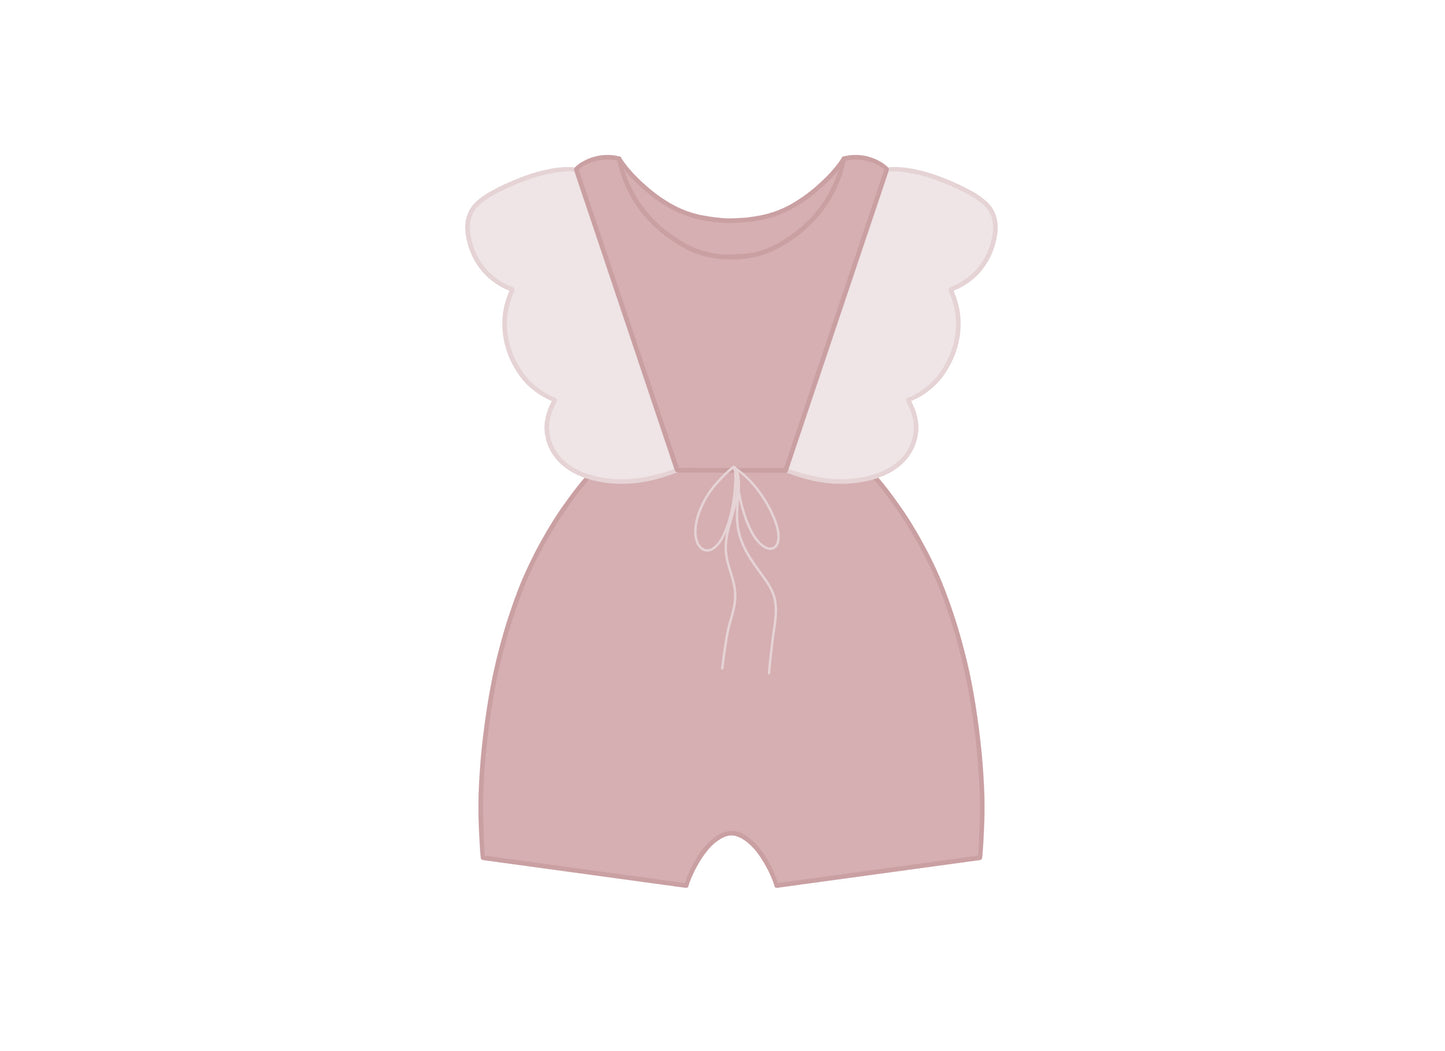 Baby Girl Outfit 5 Cookie Cutter